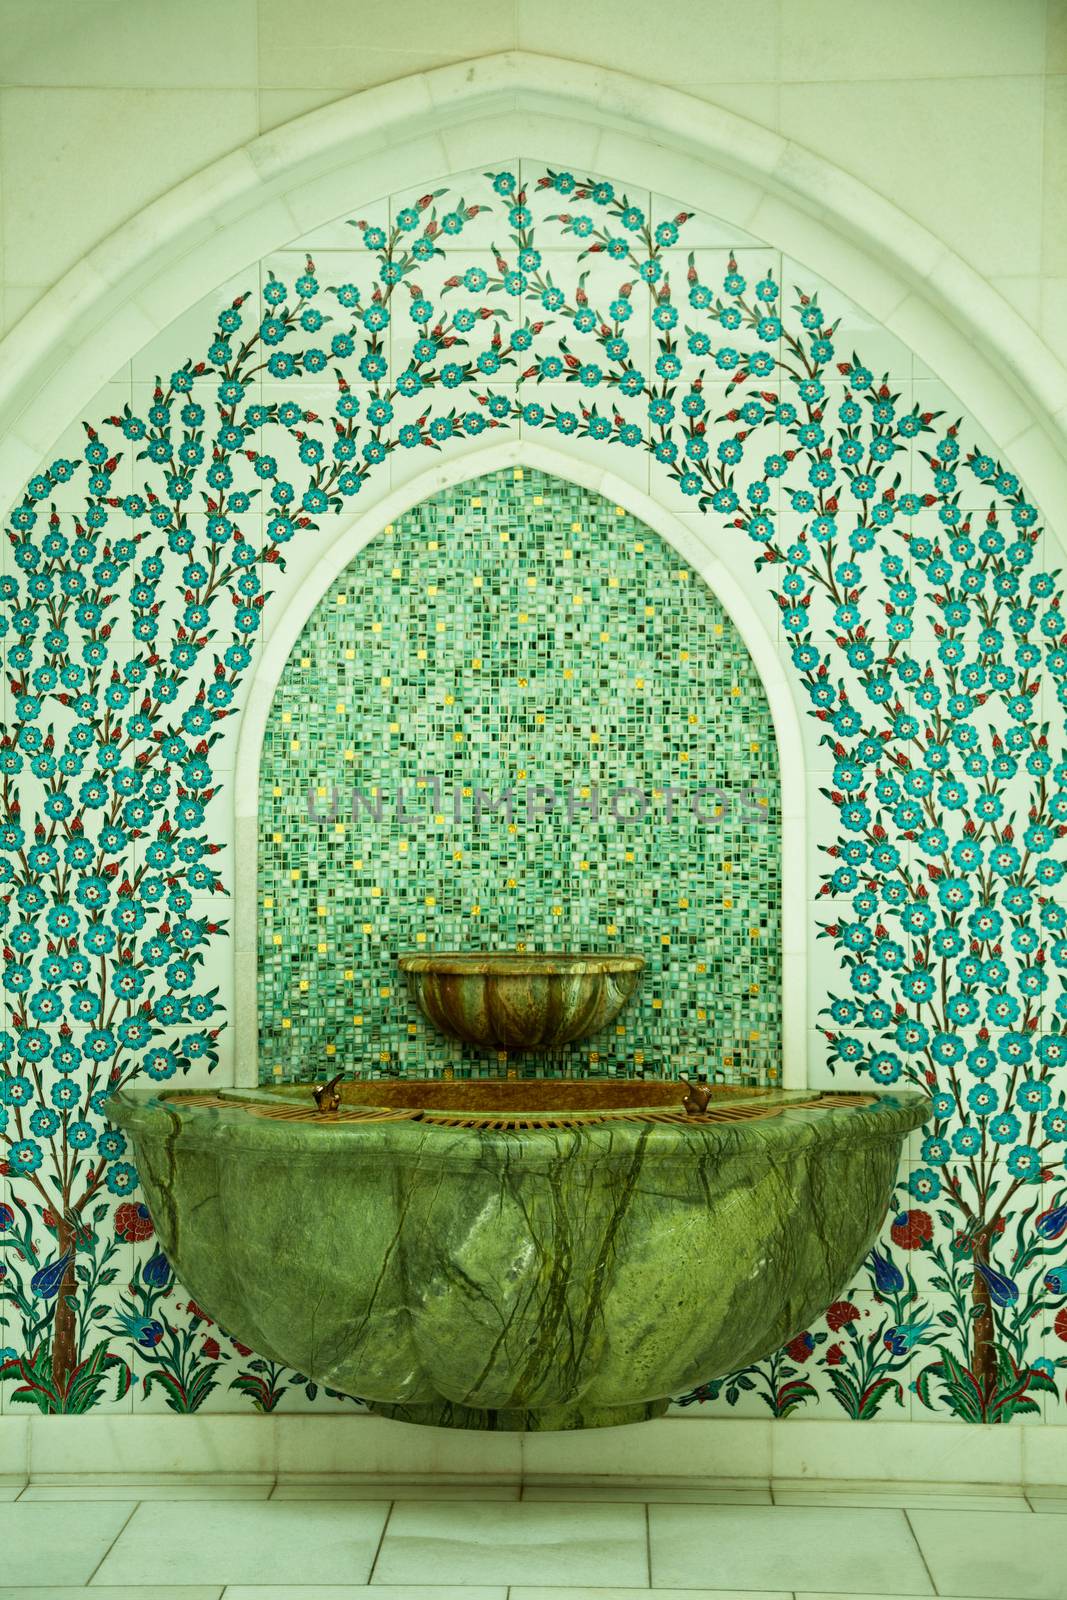 Sheikh Zayed Grand Mosque ablution by oleandra